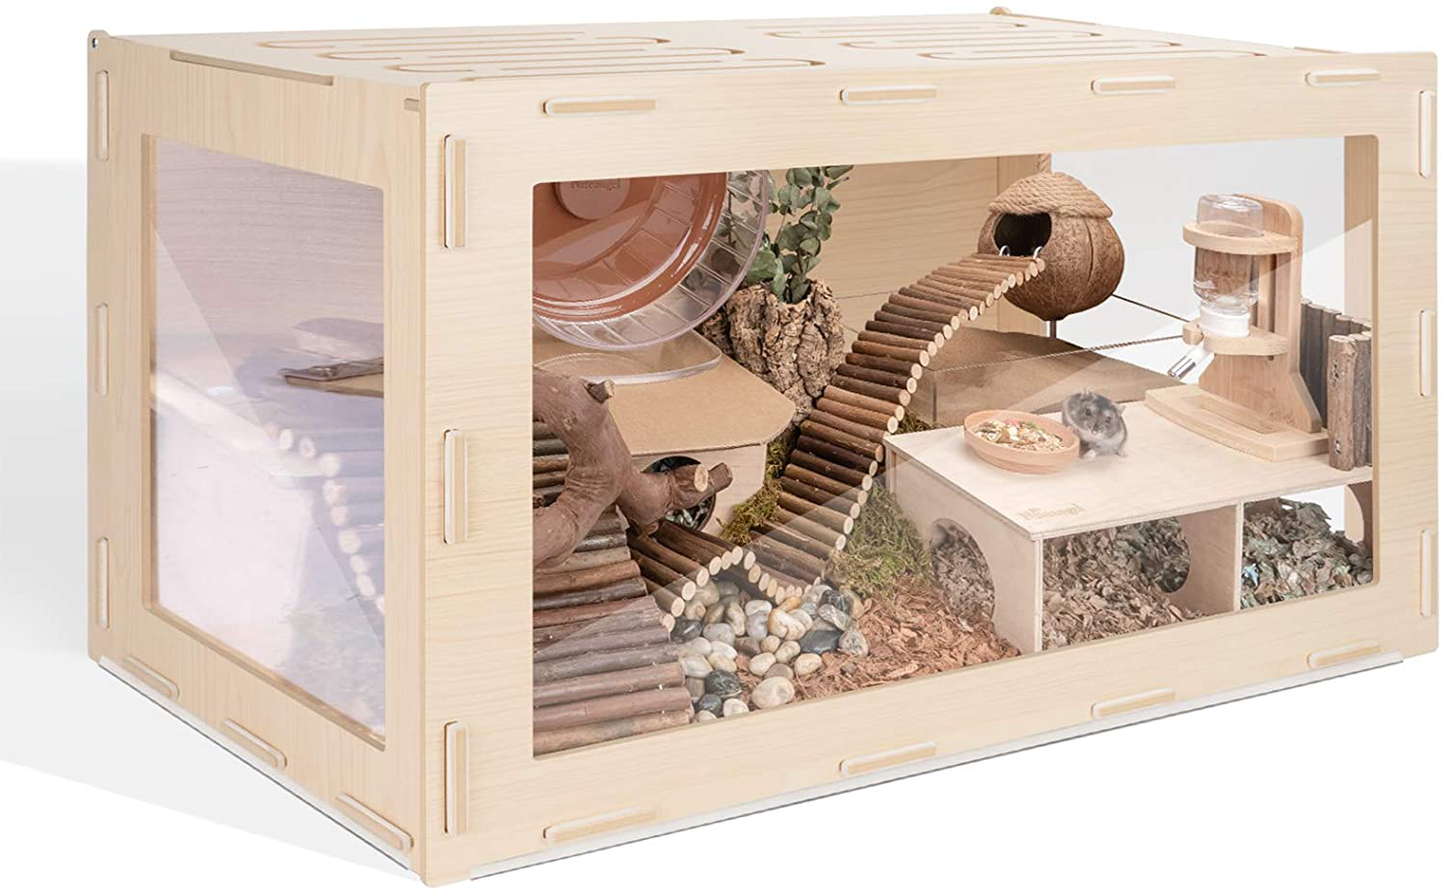 Niteangel Bigger World - MDF Aspen Small Animal Cage for Hamsters Degus Mices or Other Similar-Sized Pets